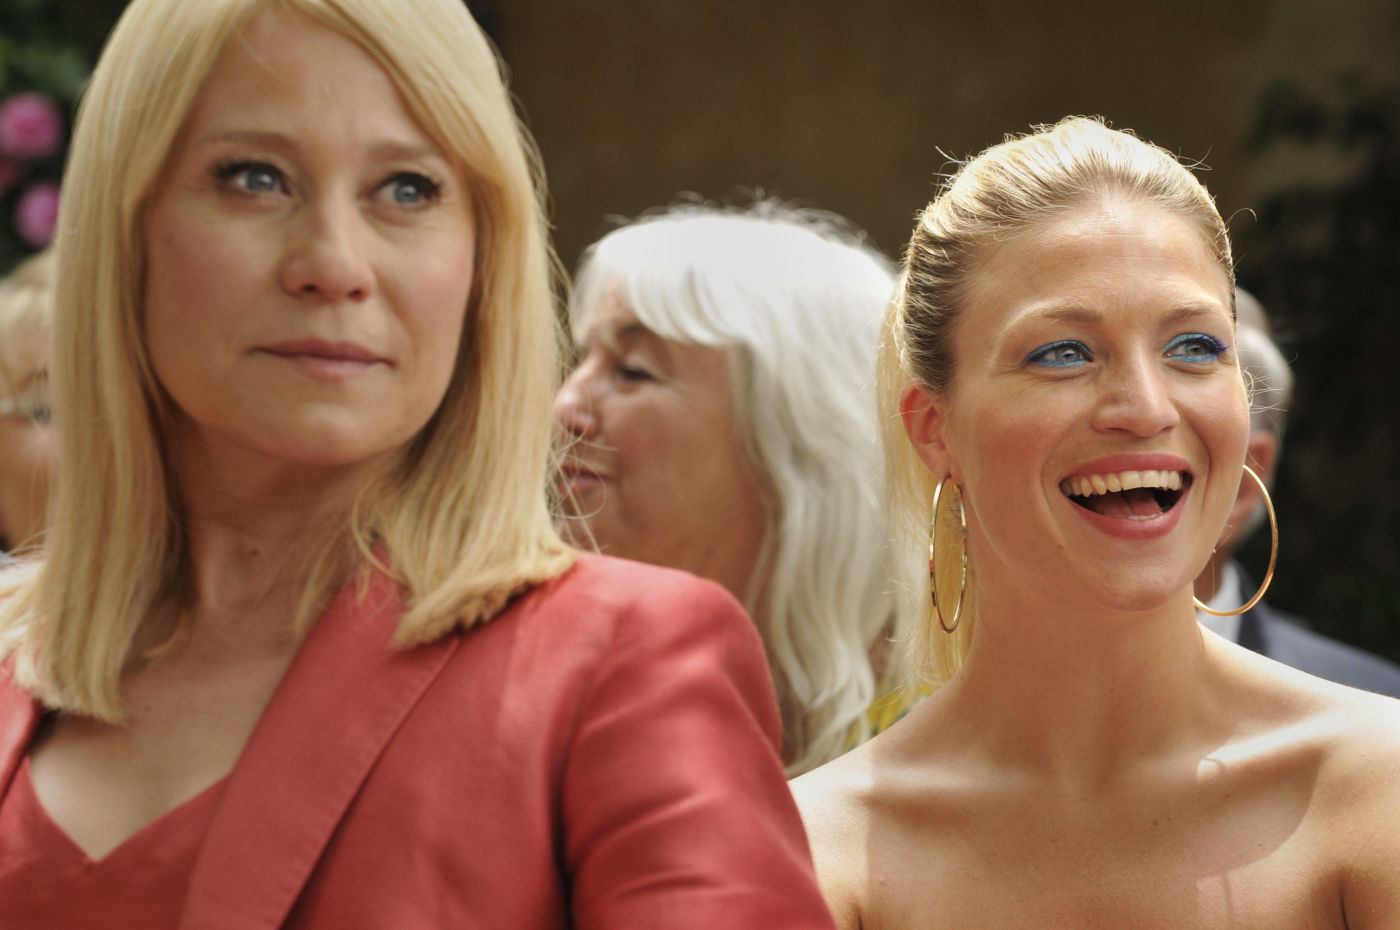 Trine Dyrholm stars as Ida and Christiane Schaumburg-Muller stars as Thilde in Sony Pictures Classics' Love Is All You Need (2013)